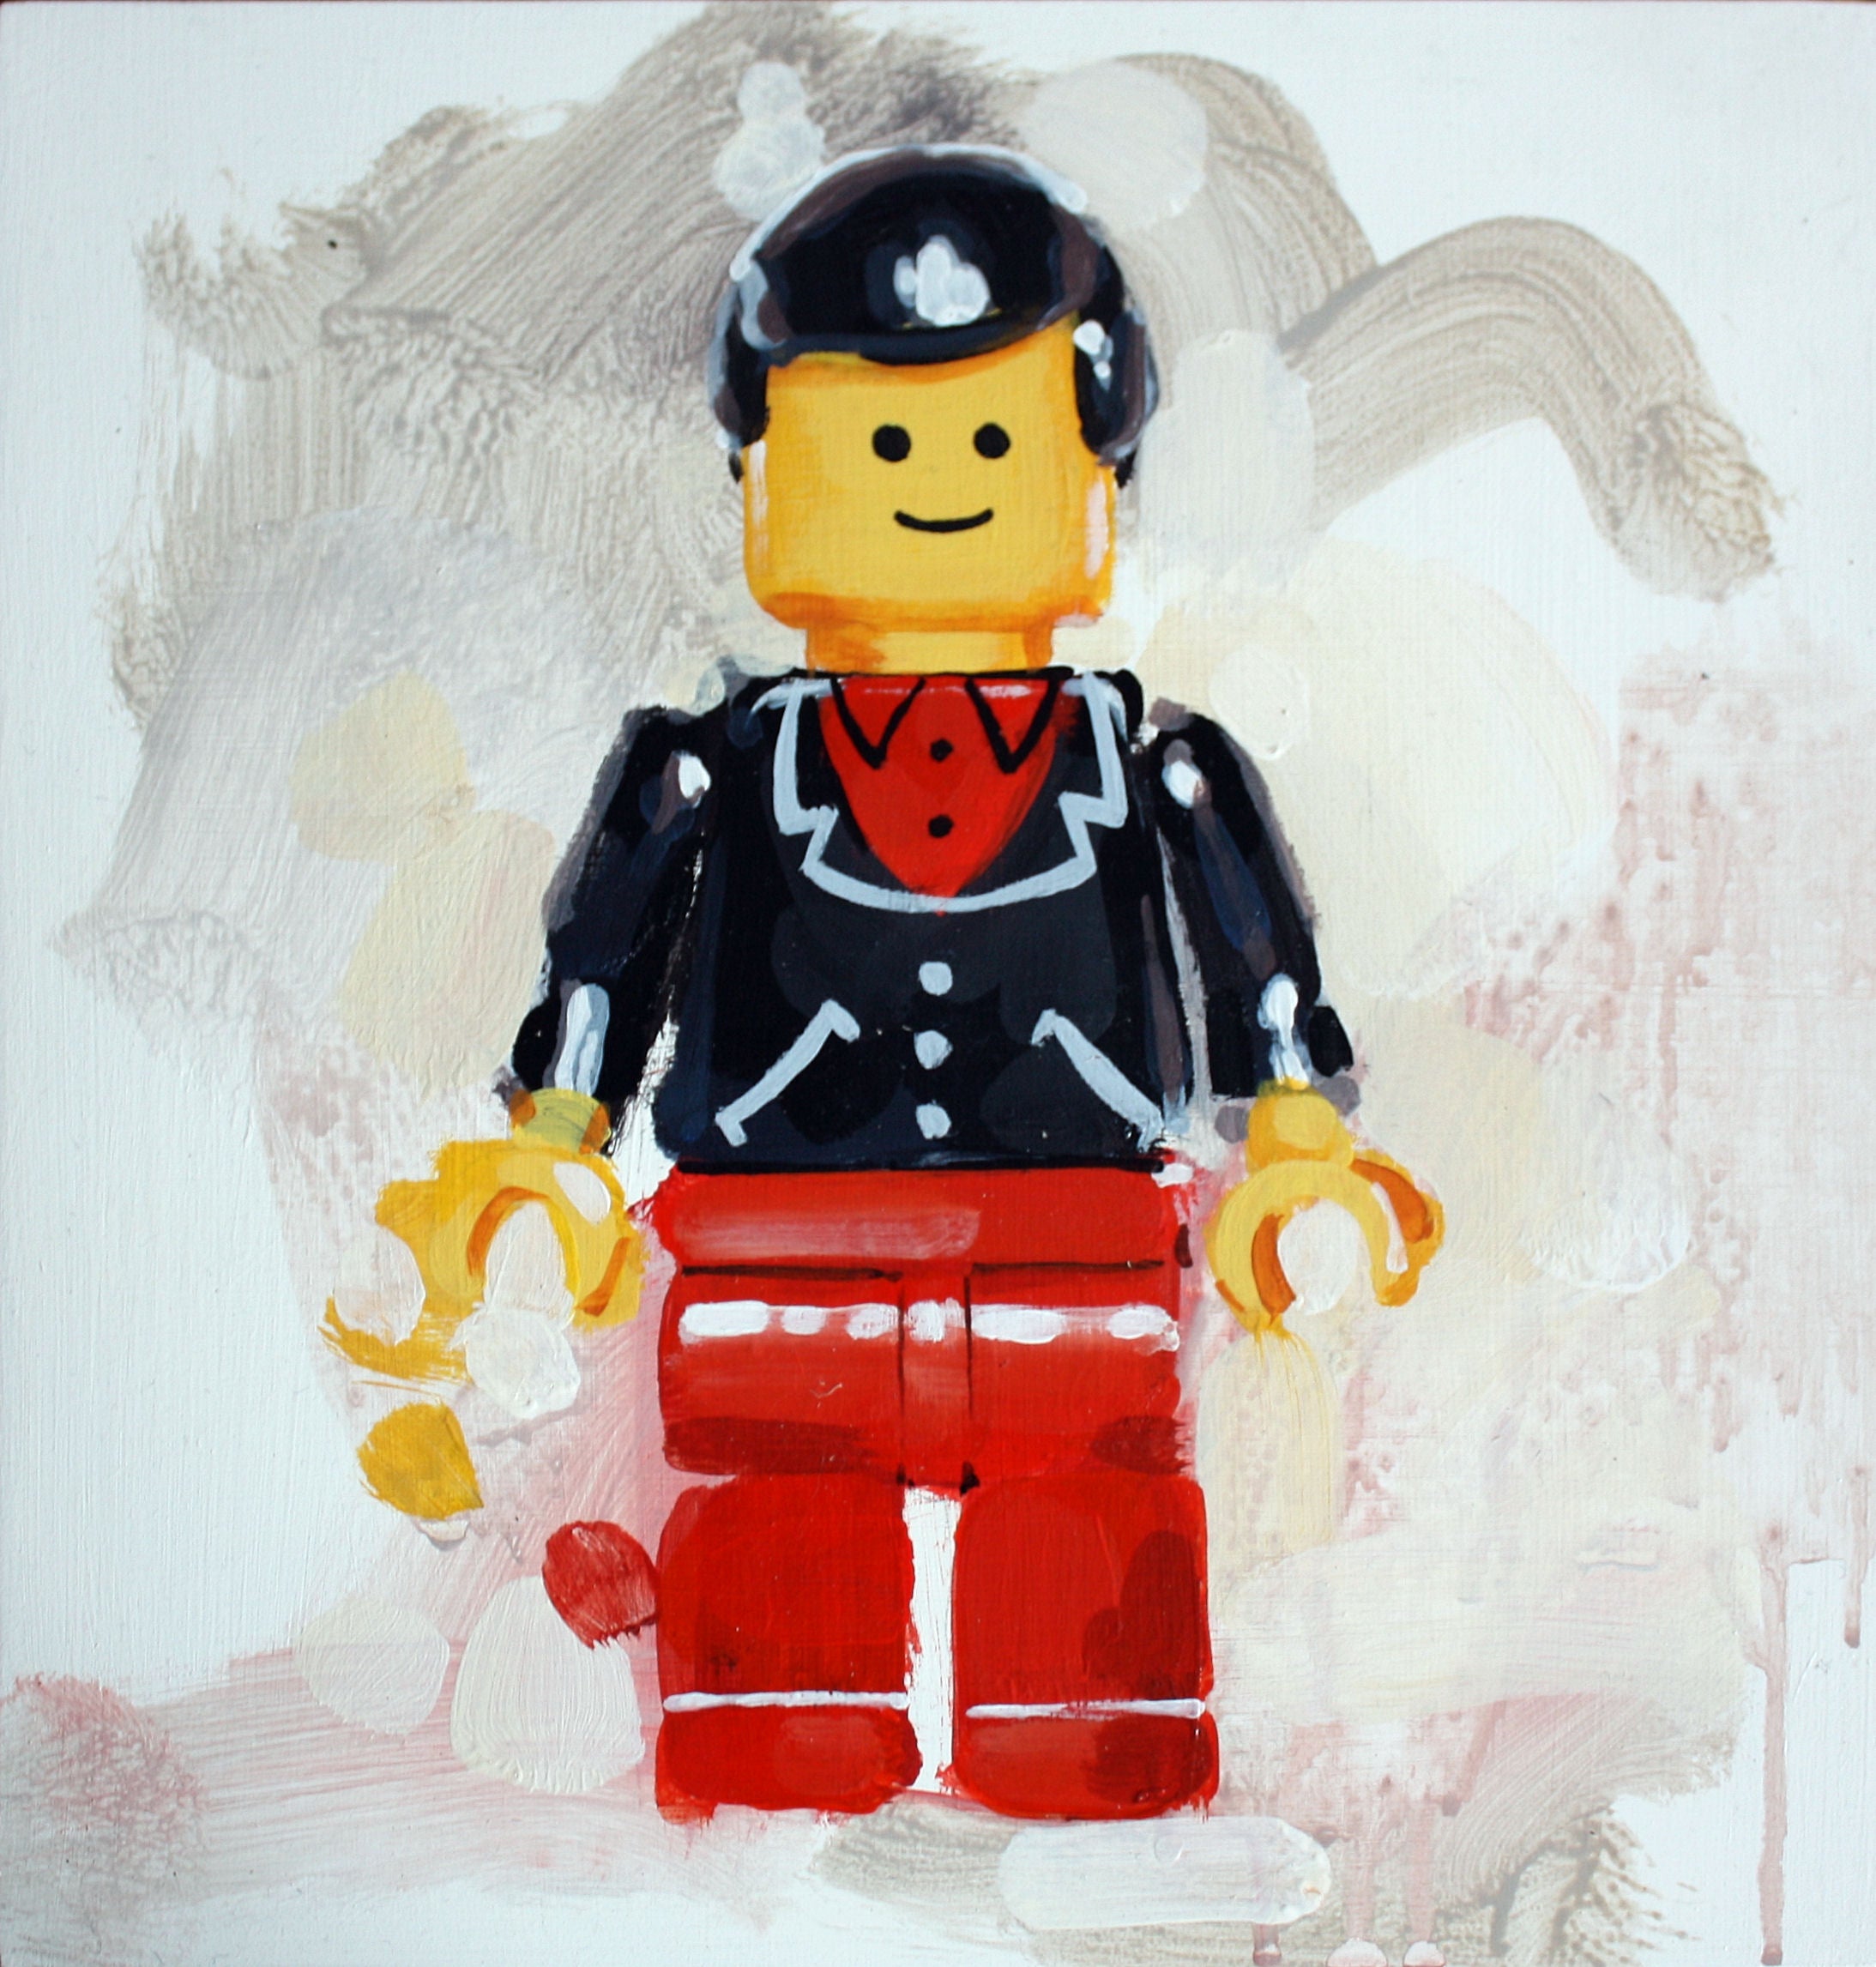 Lego Commission by James Paterson